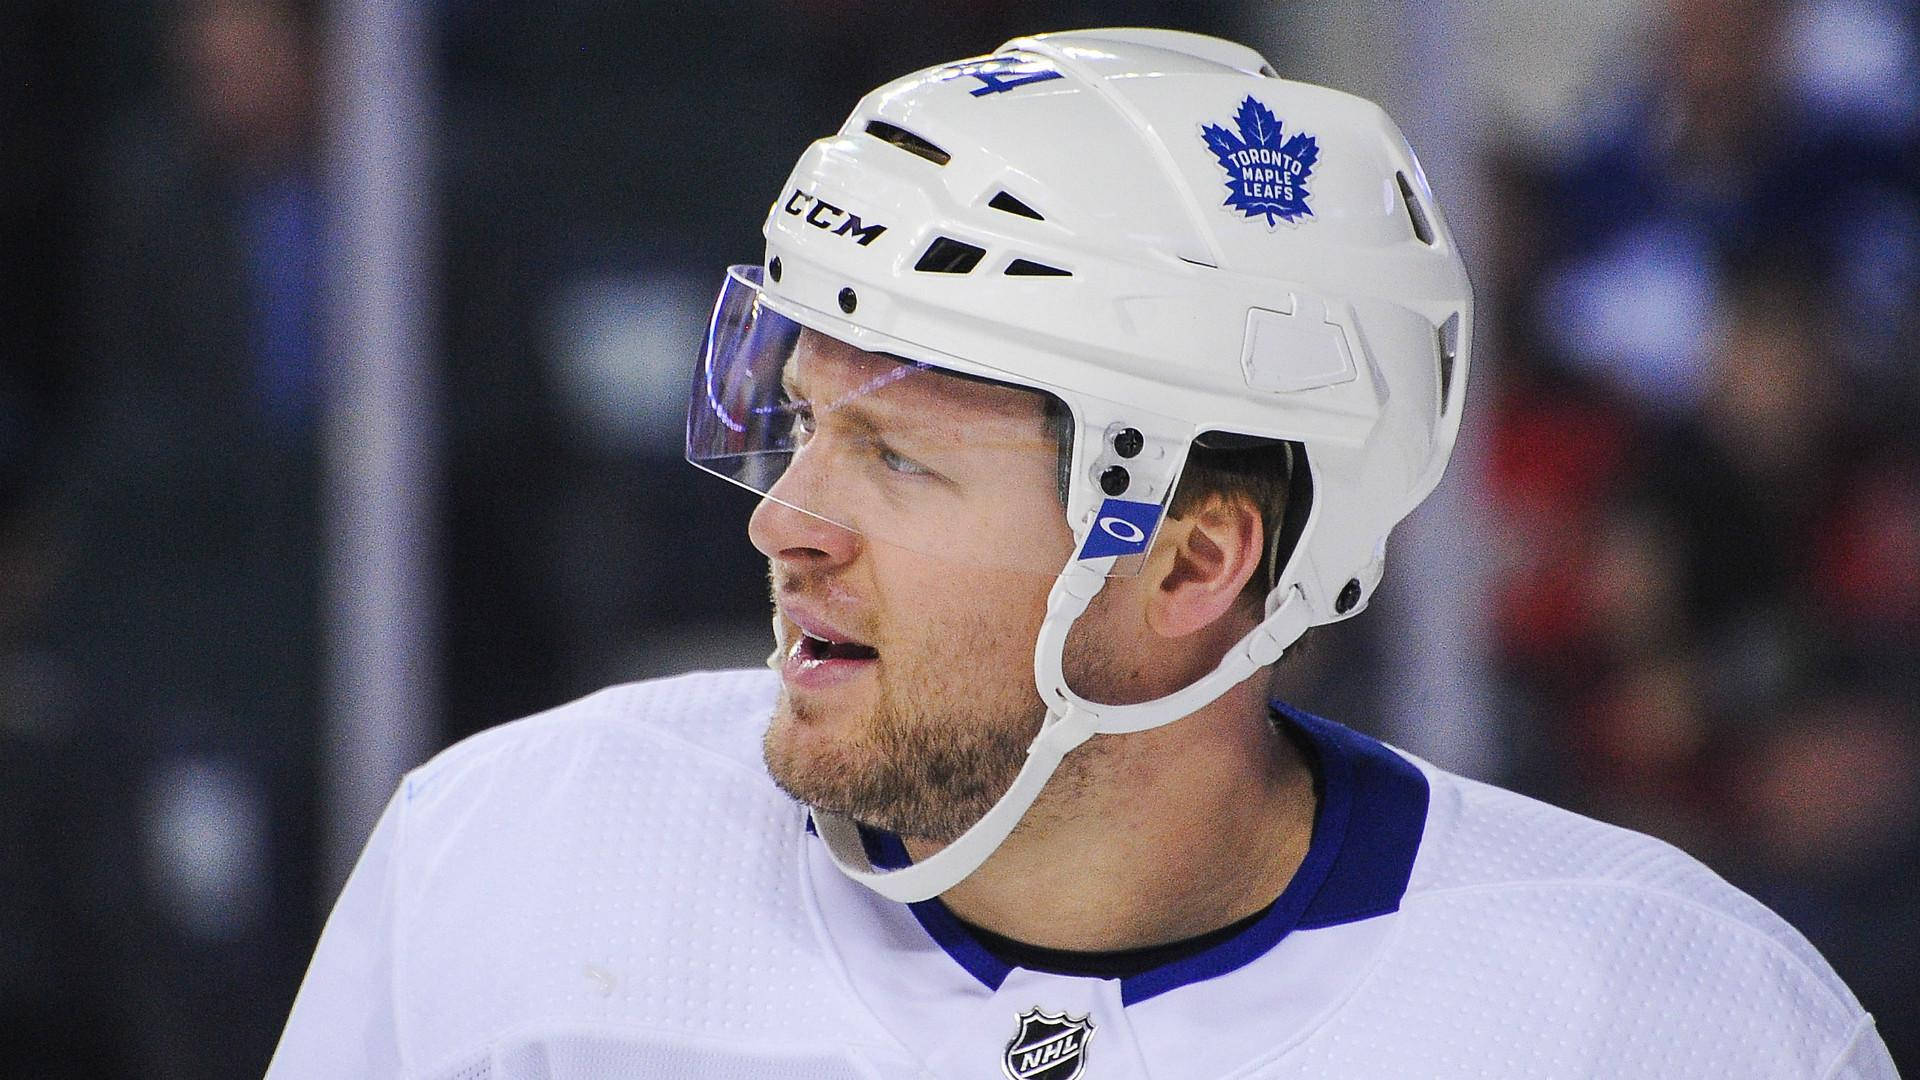 Canadian Professional Athlete Morgan Rielly Wallpaper